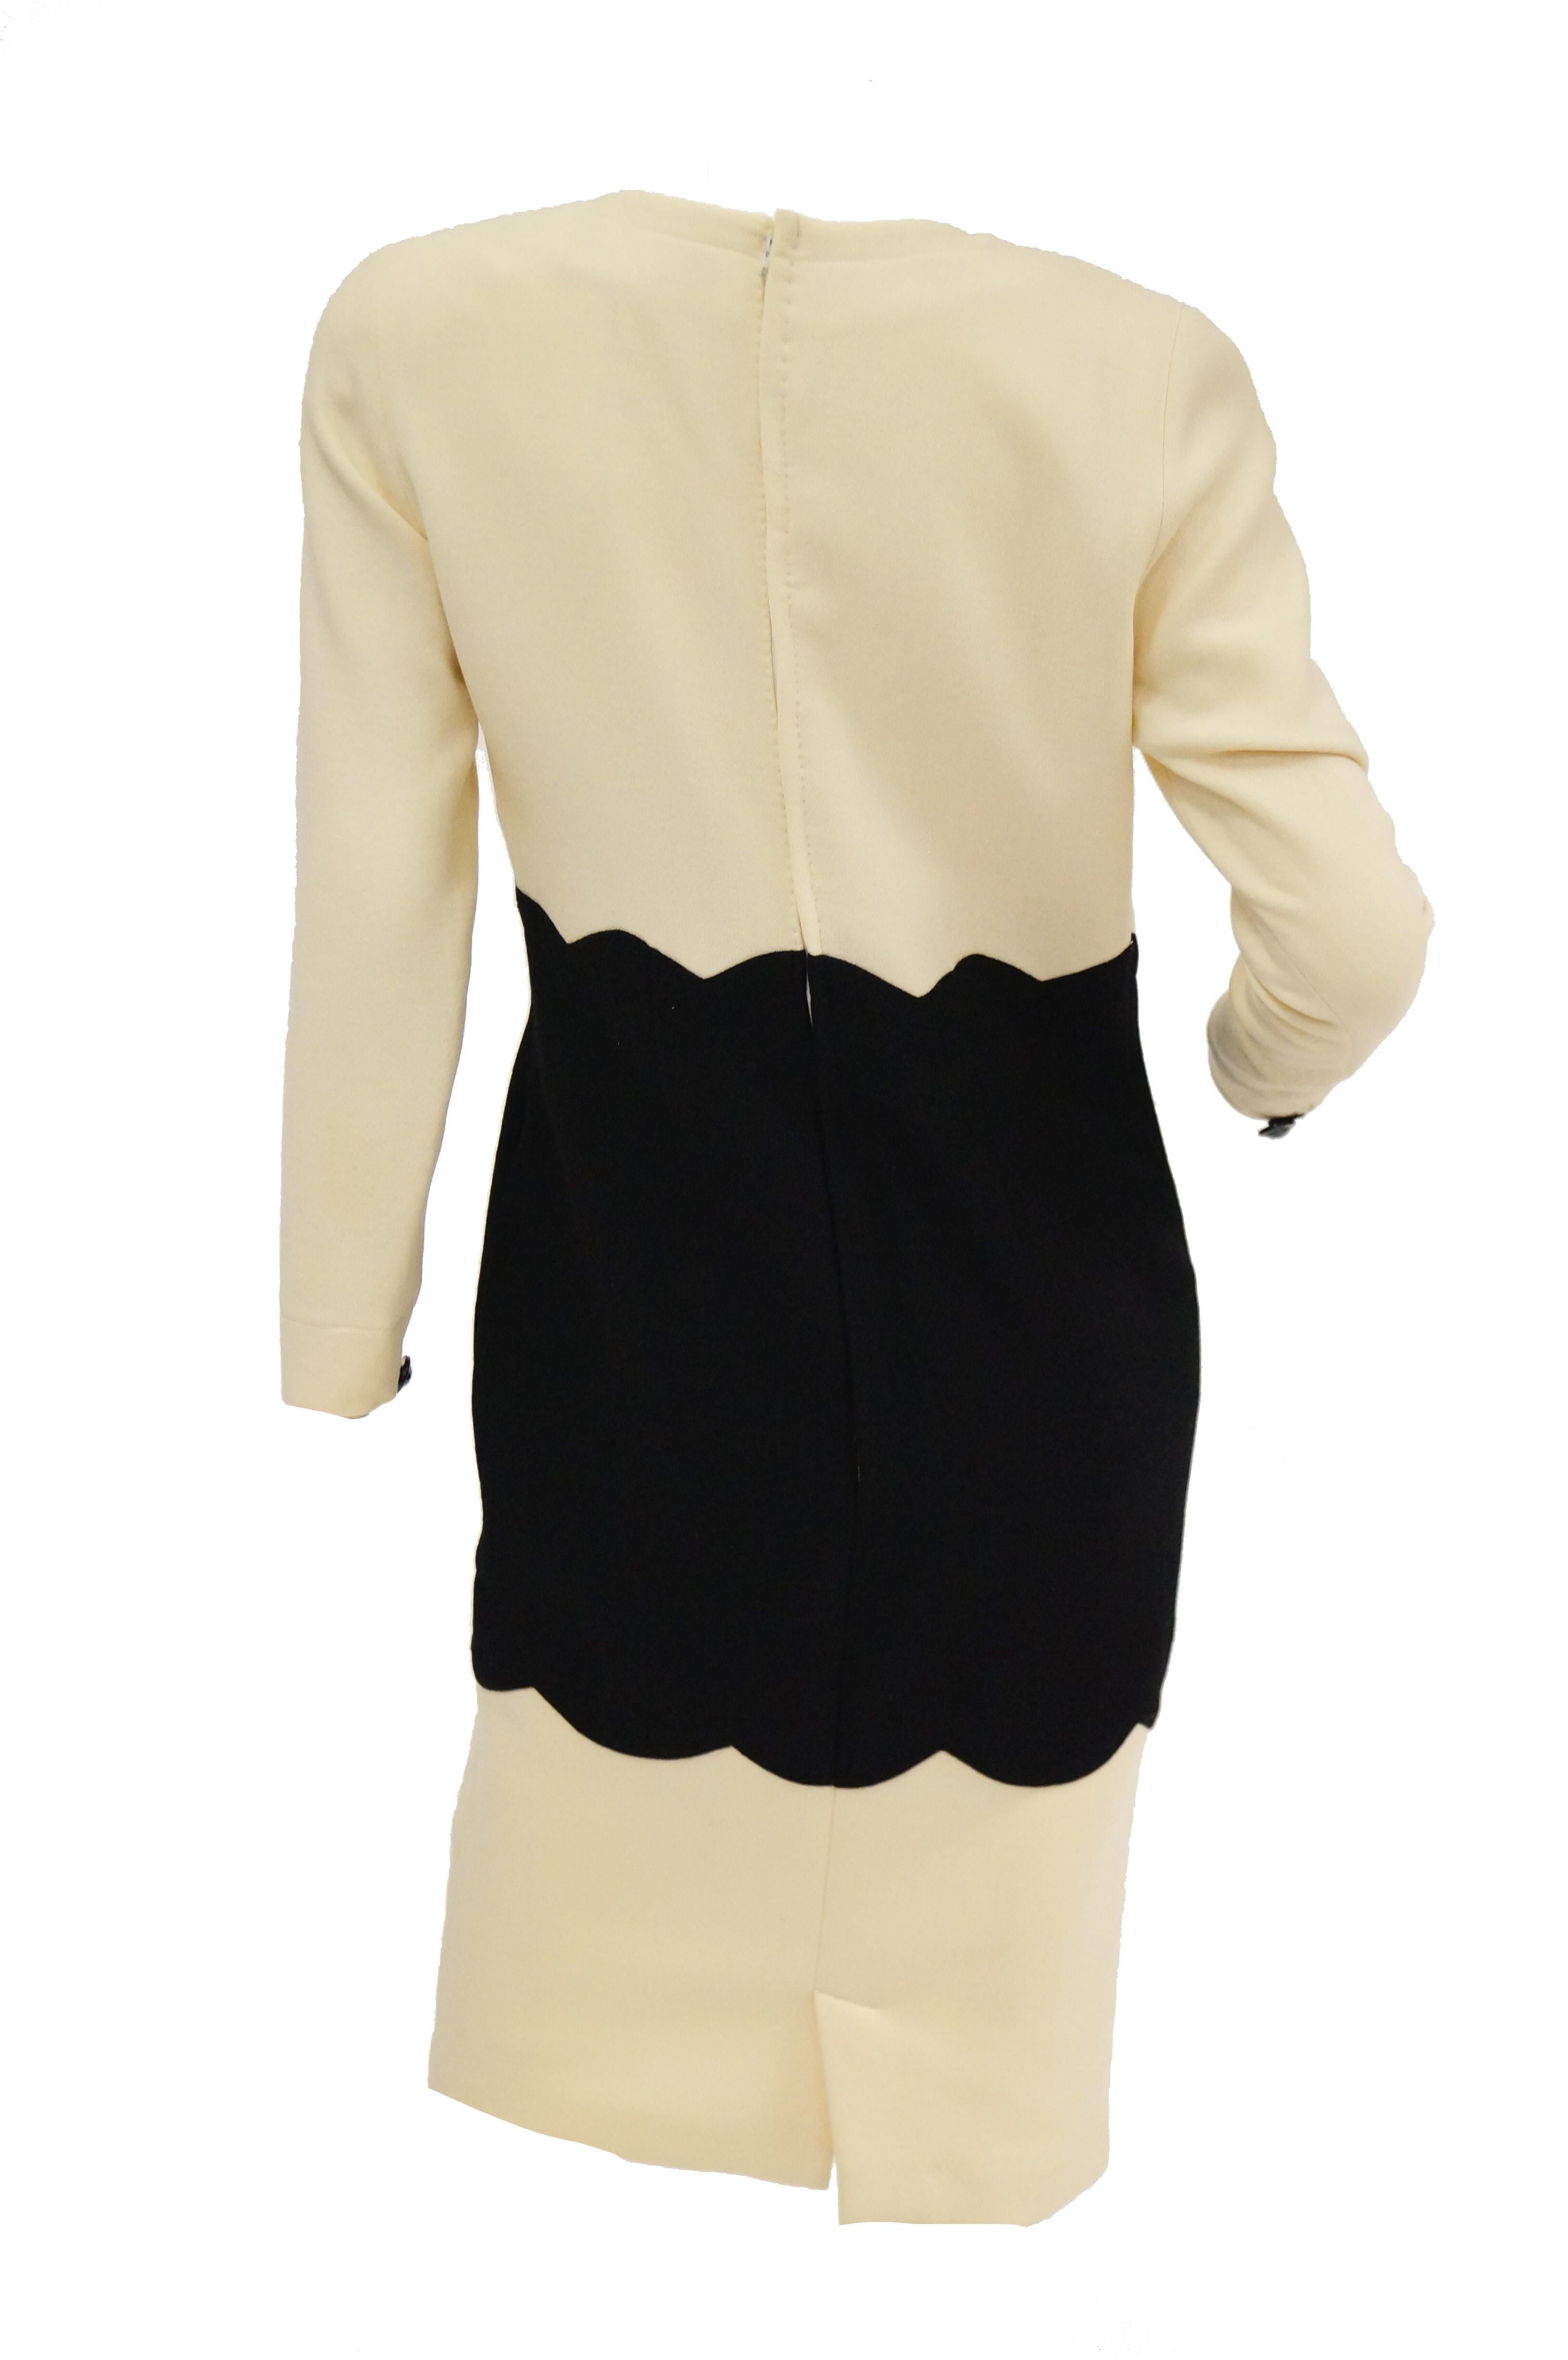 Women's 1980s Fontana Couture for Amen Wardy Cream and Black Scallop Suit Dress